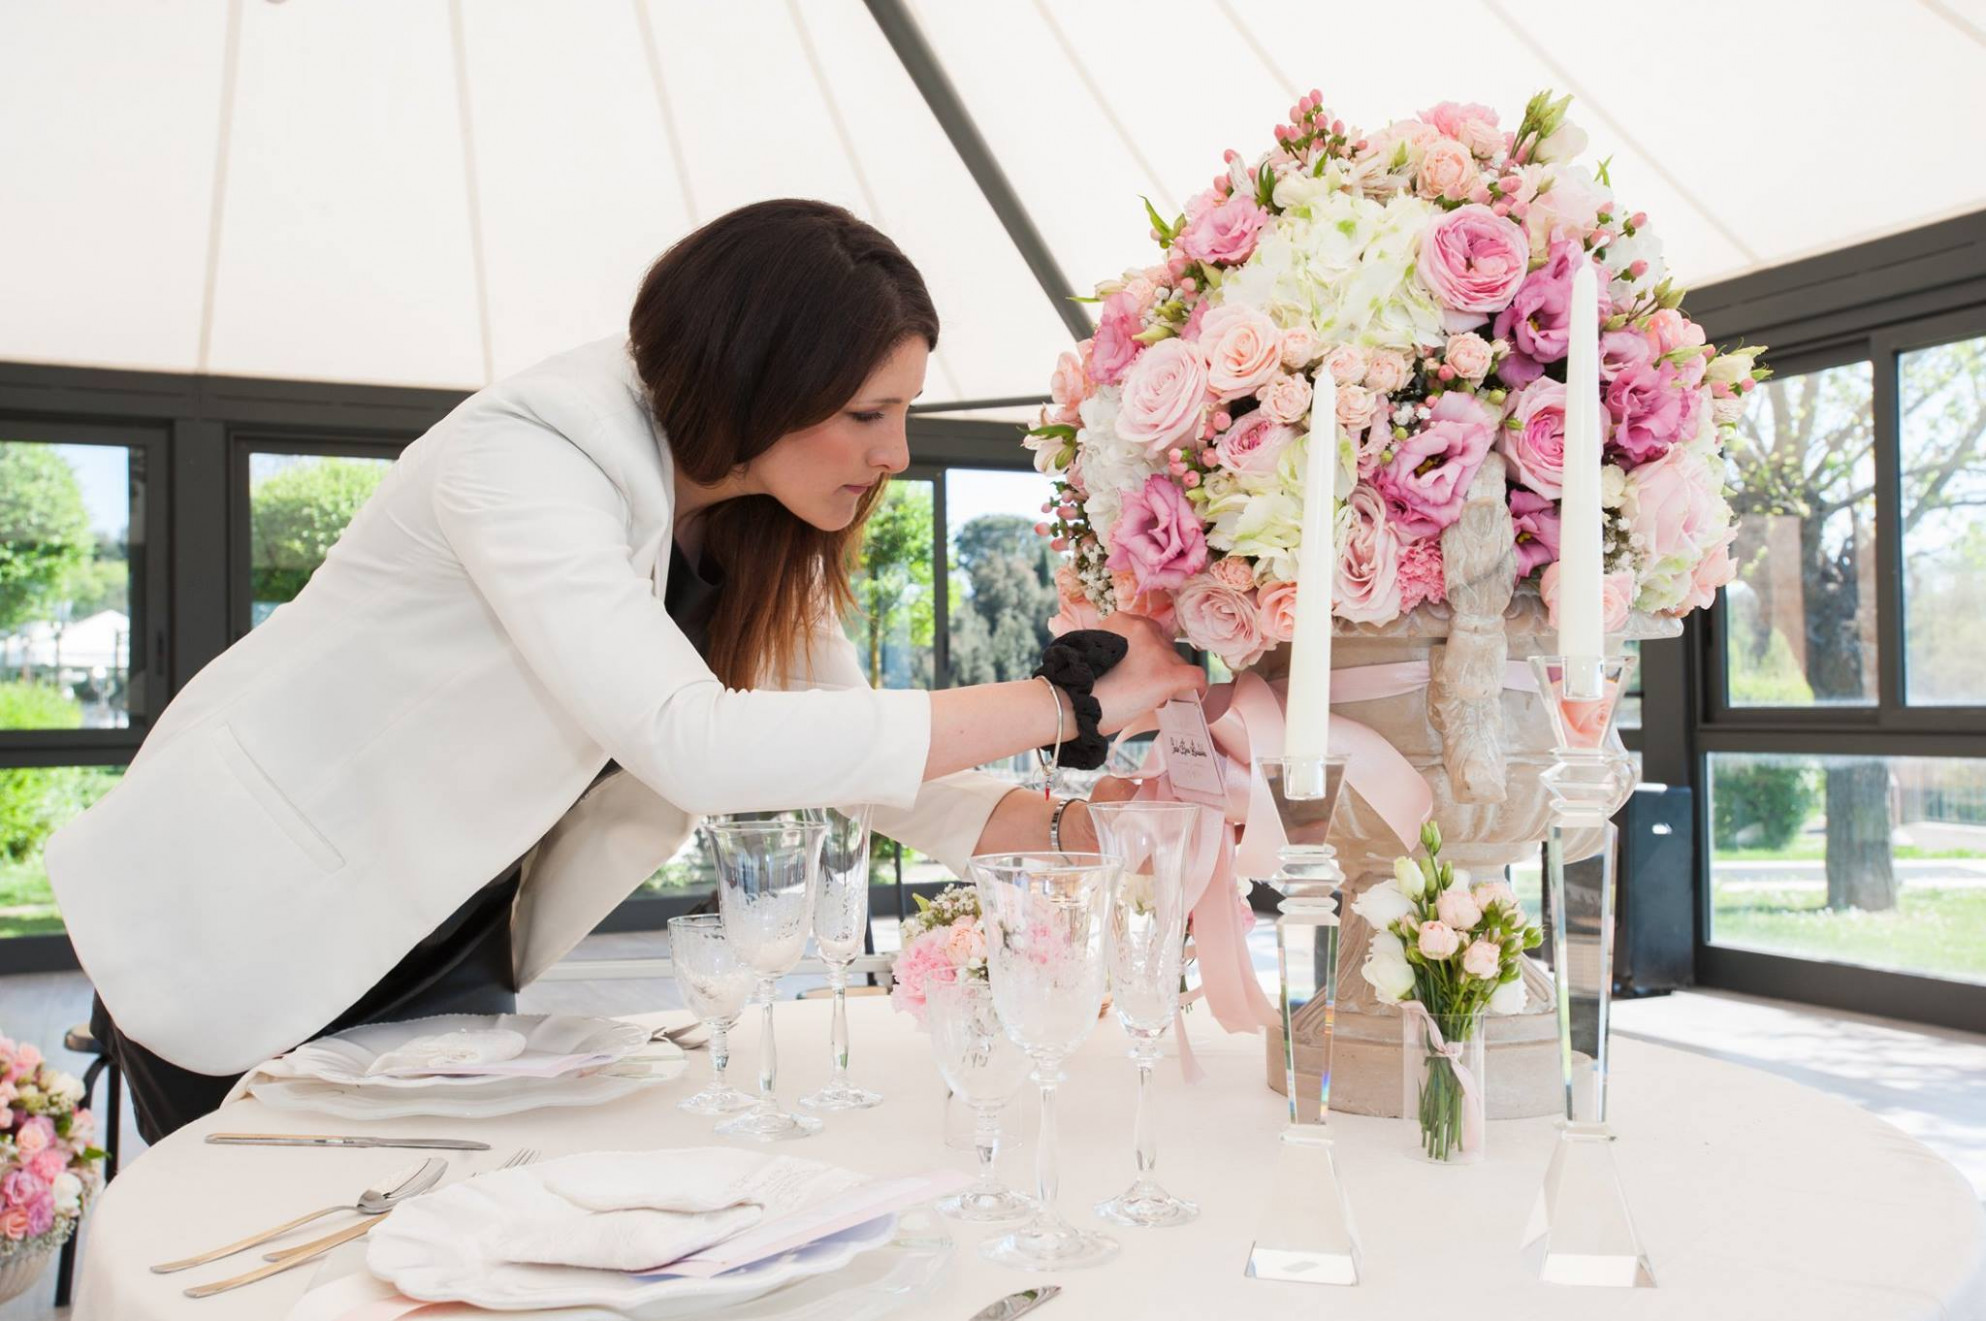 7 Reasons Why You Should Hire Professional Wedding Planners